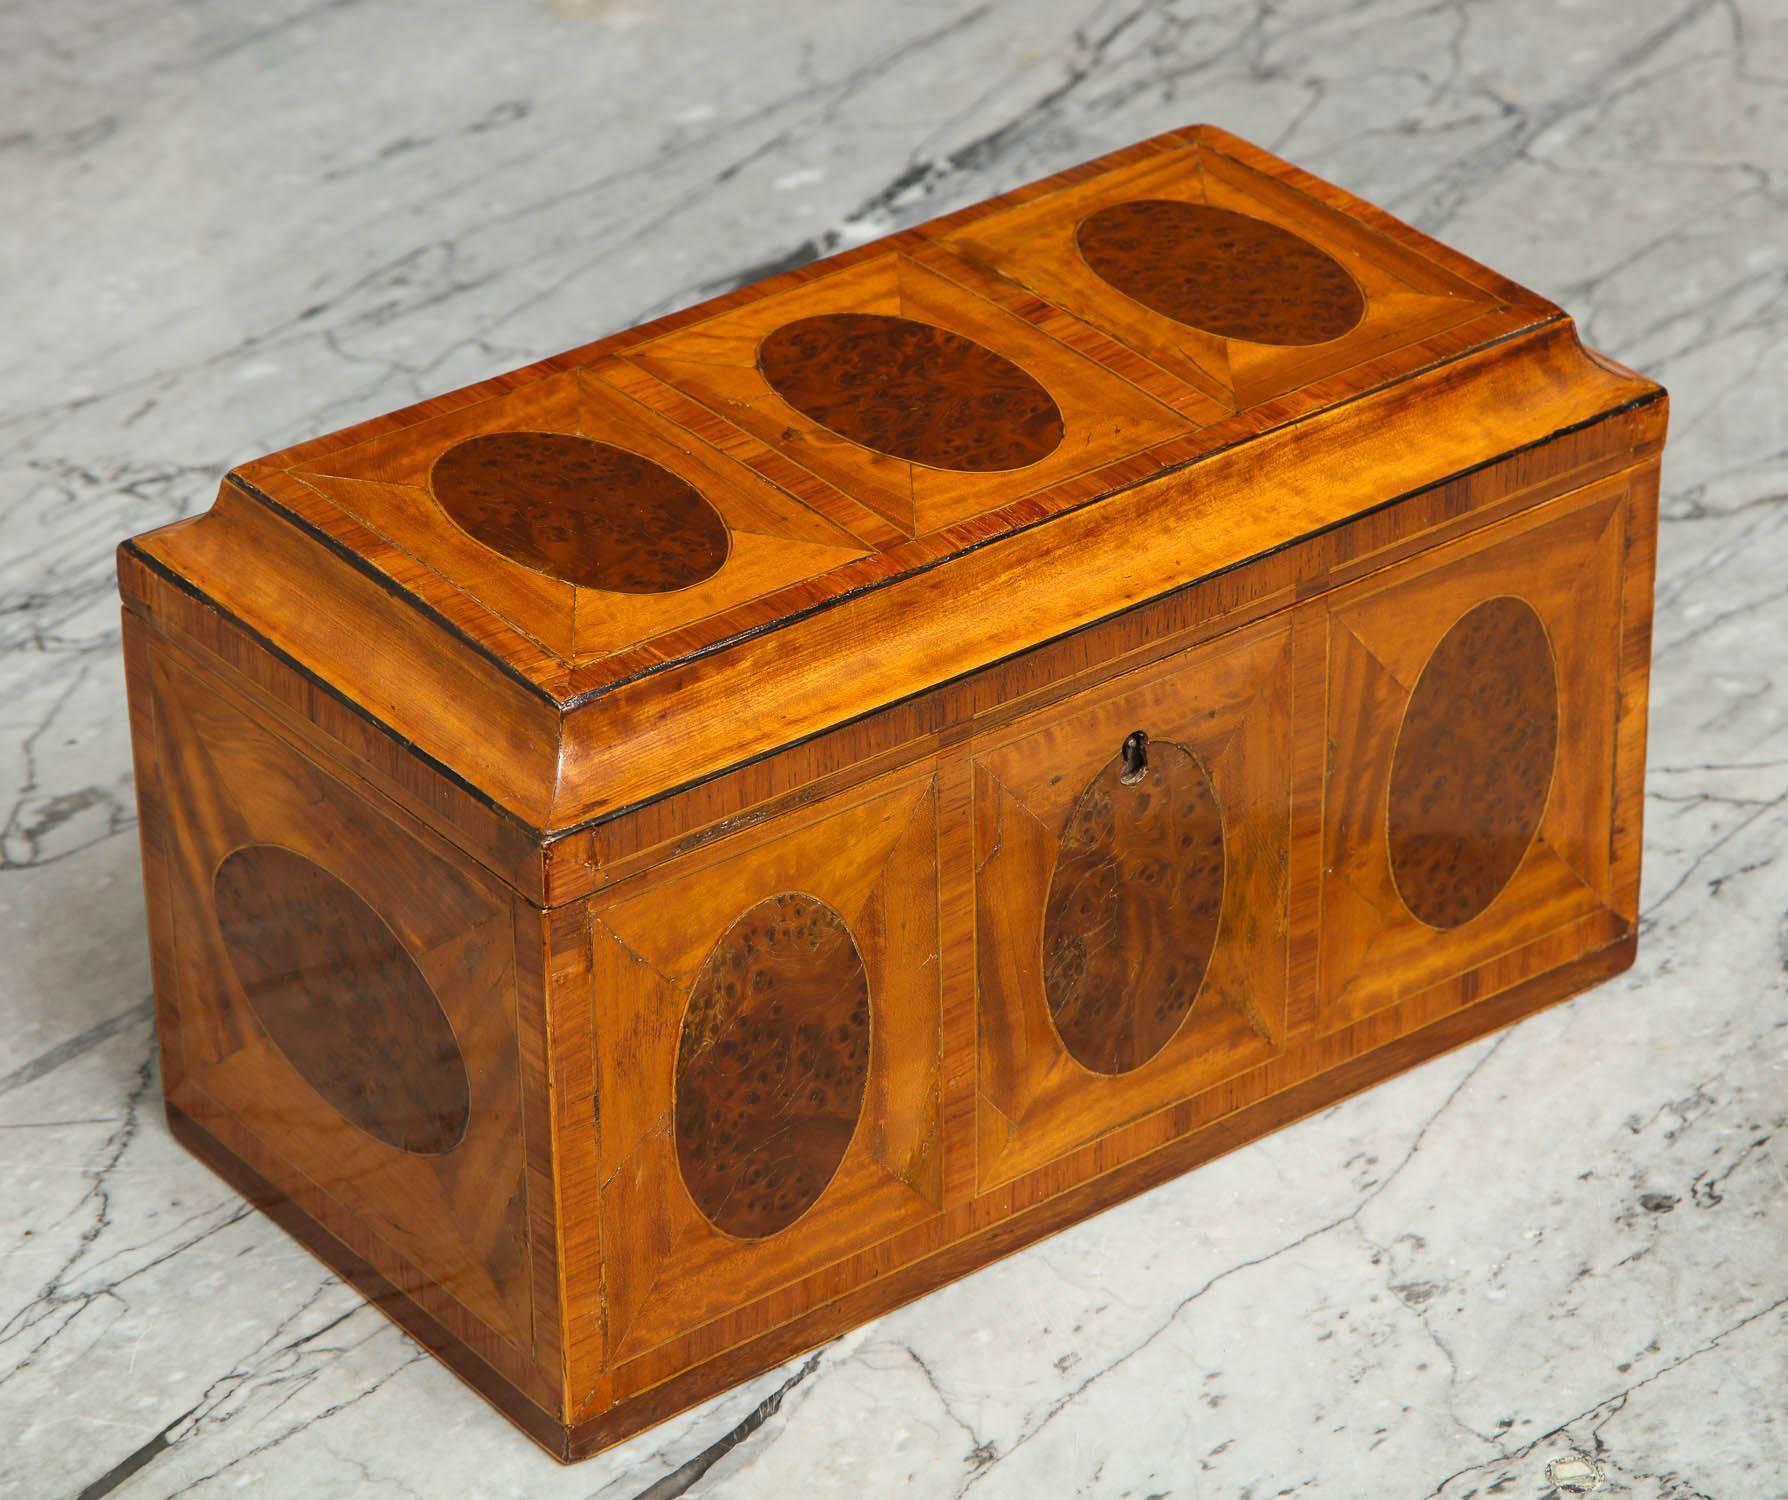 Fine George III inlaid satinwood tea caddy having oval inlays of burl yew wood in a mitered satinwood panel, the top with concave corners, the interior with large satinwood patera on burr yew ground.